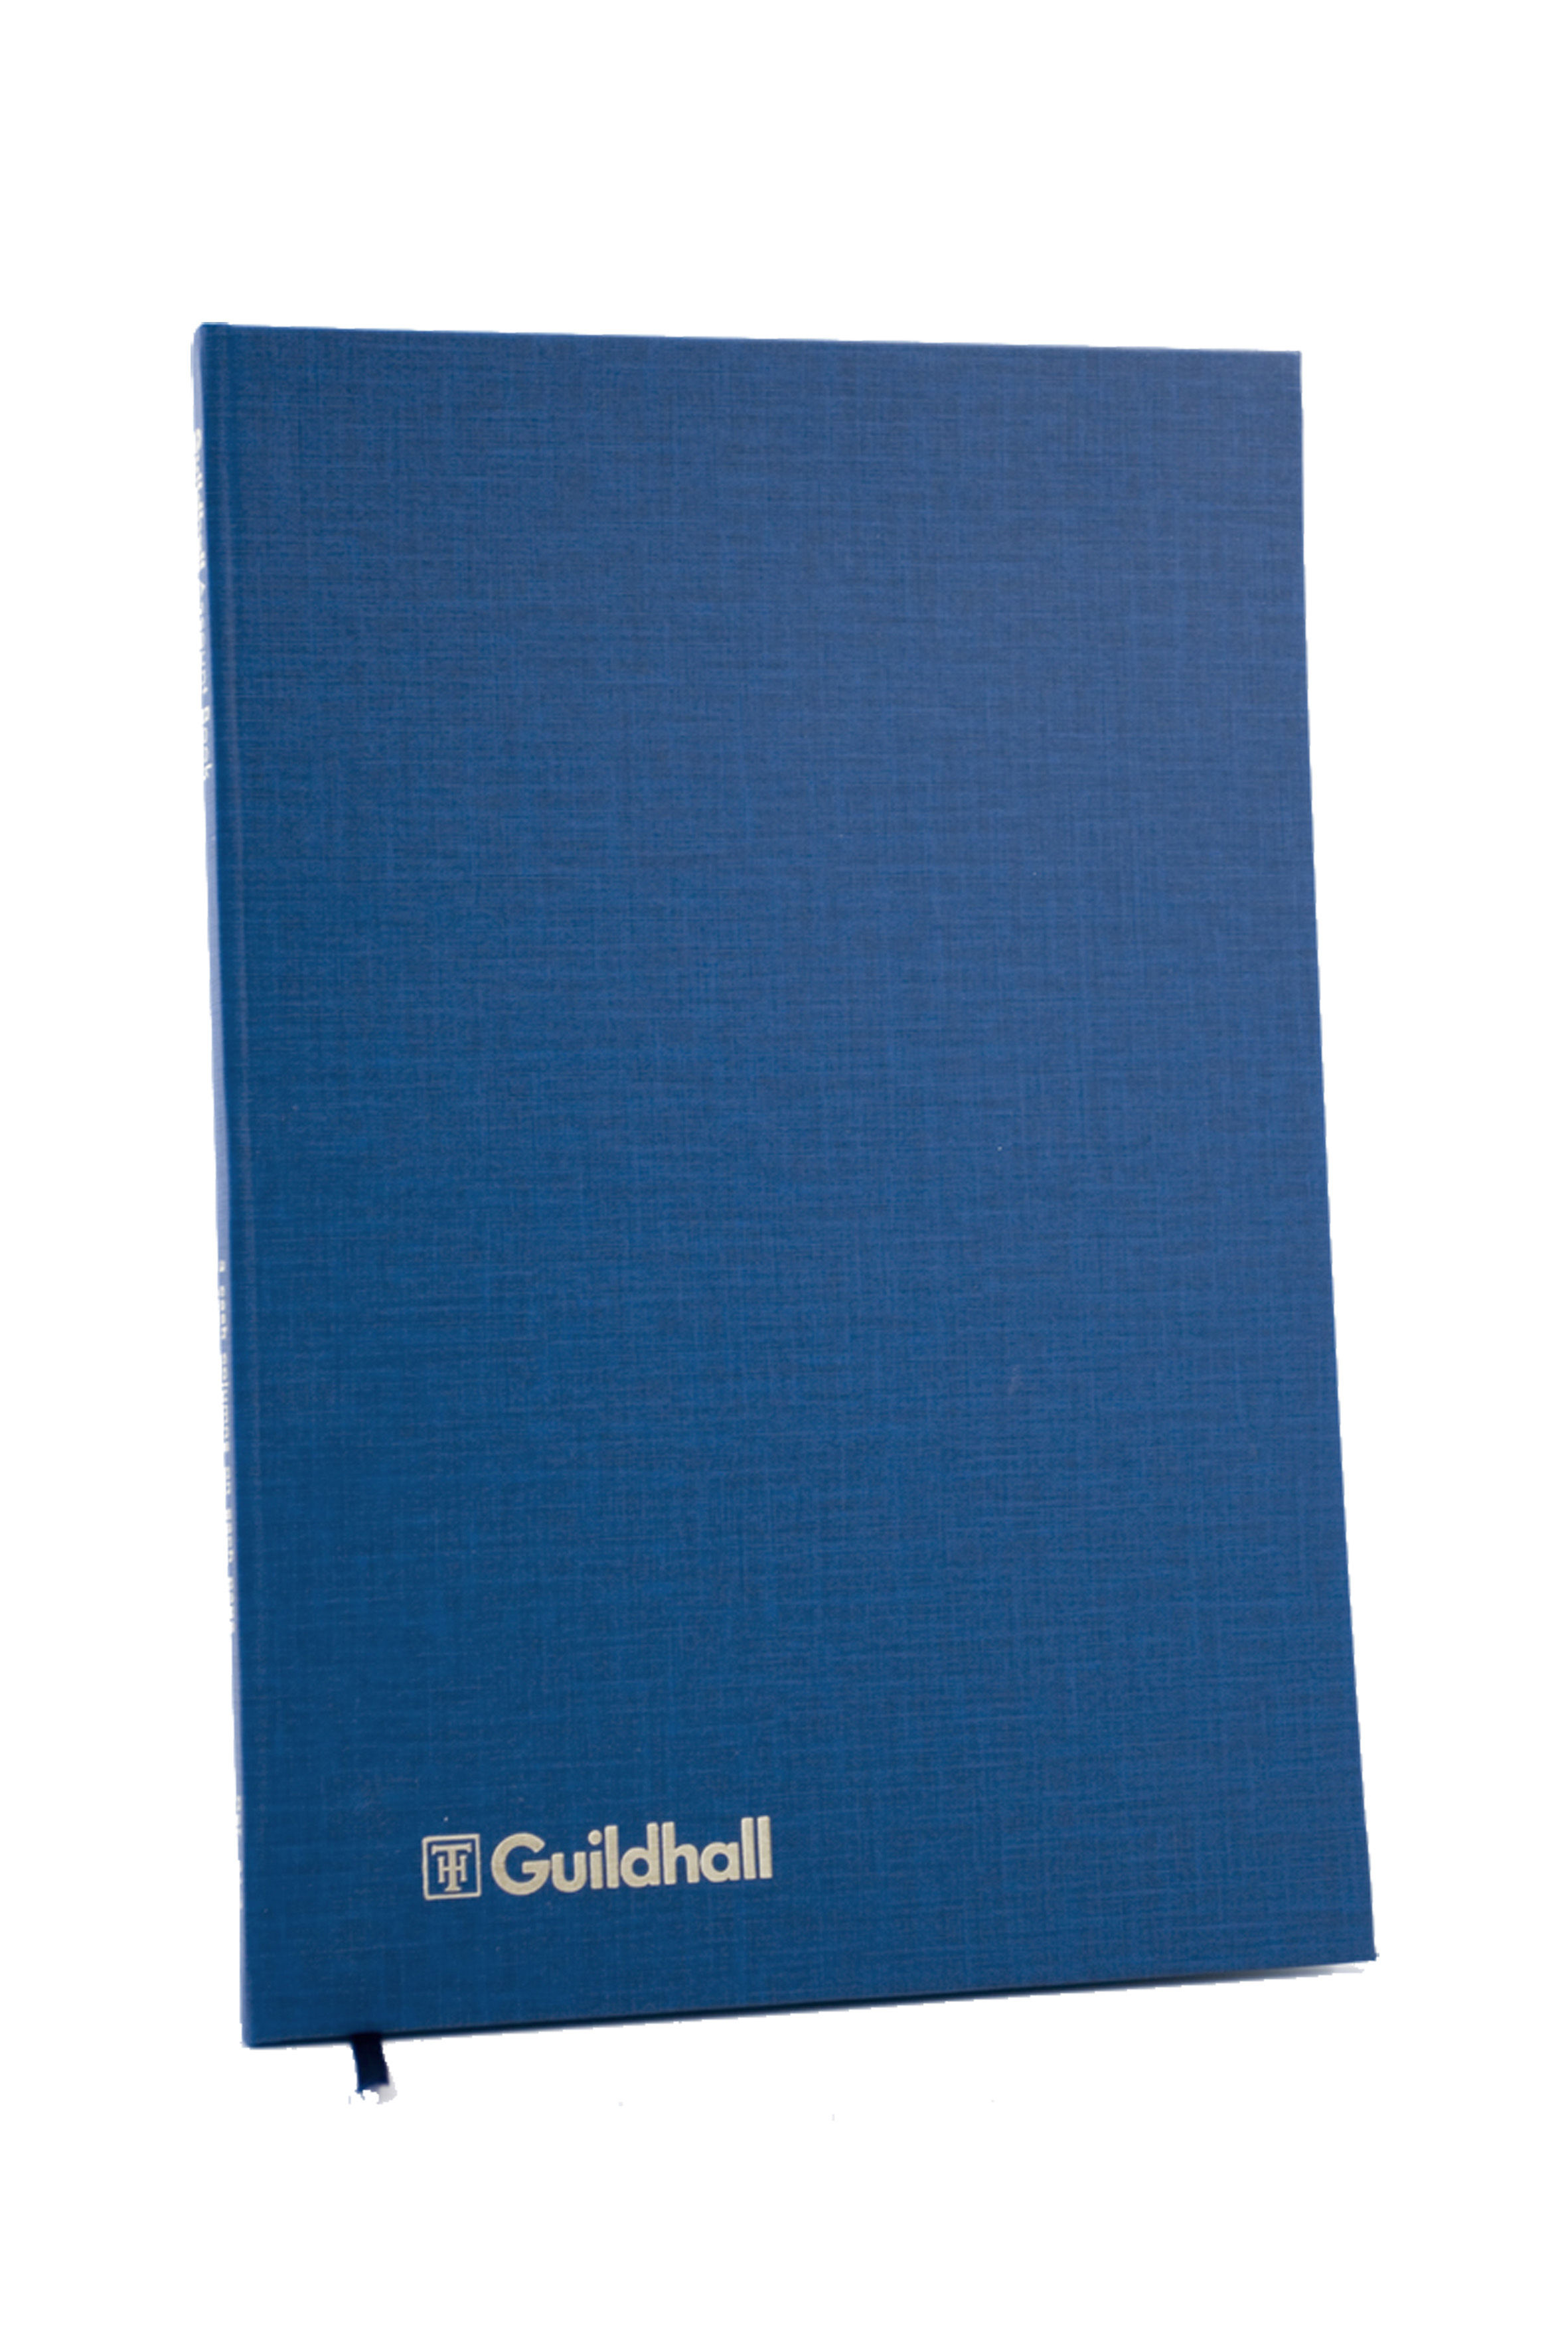 Guildhall Account Book 31 Series 3 Col